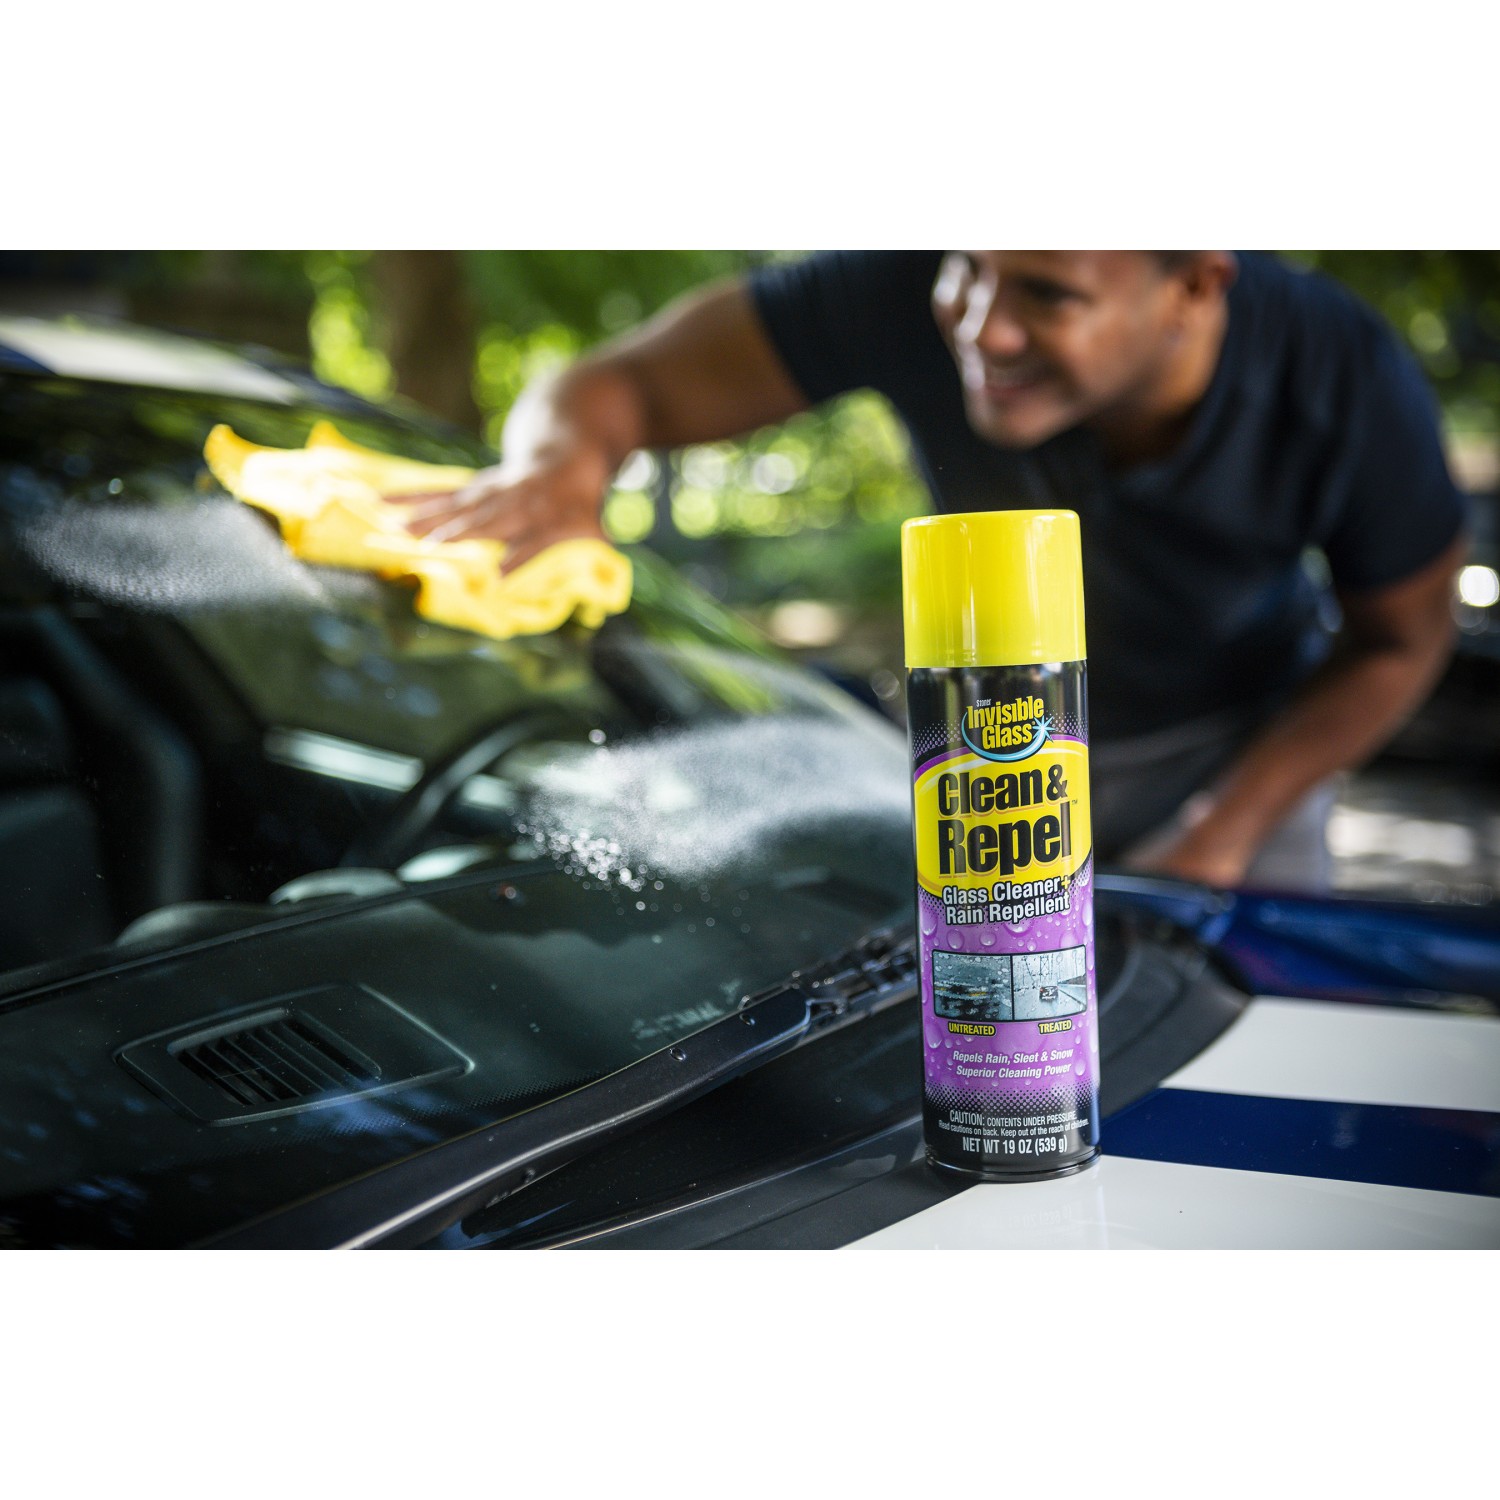 How To Super Clean & Repel Rain from Car's Windshield -Jonny DIY